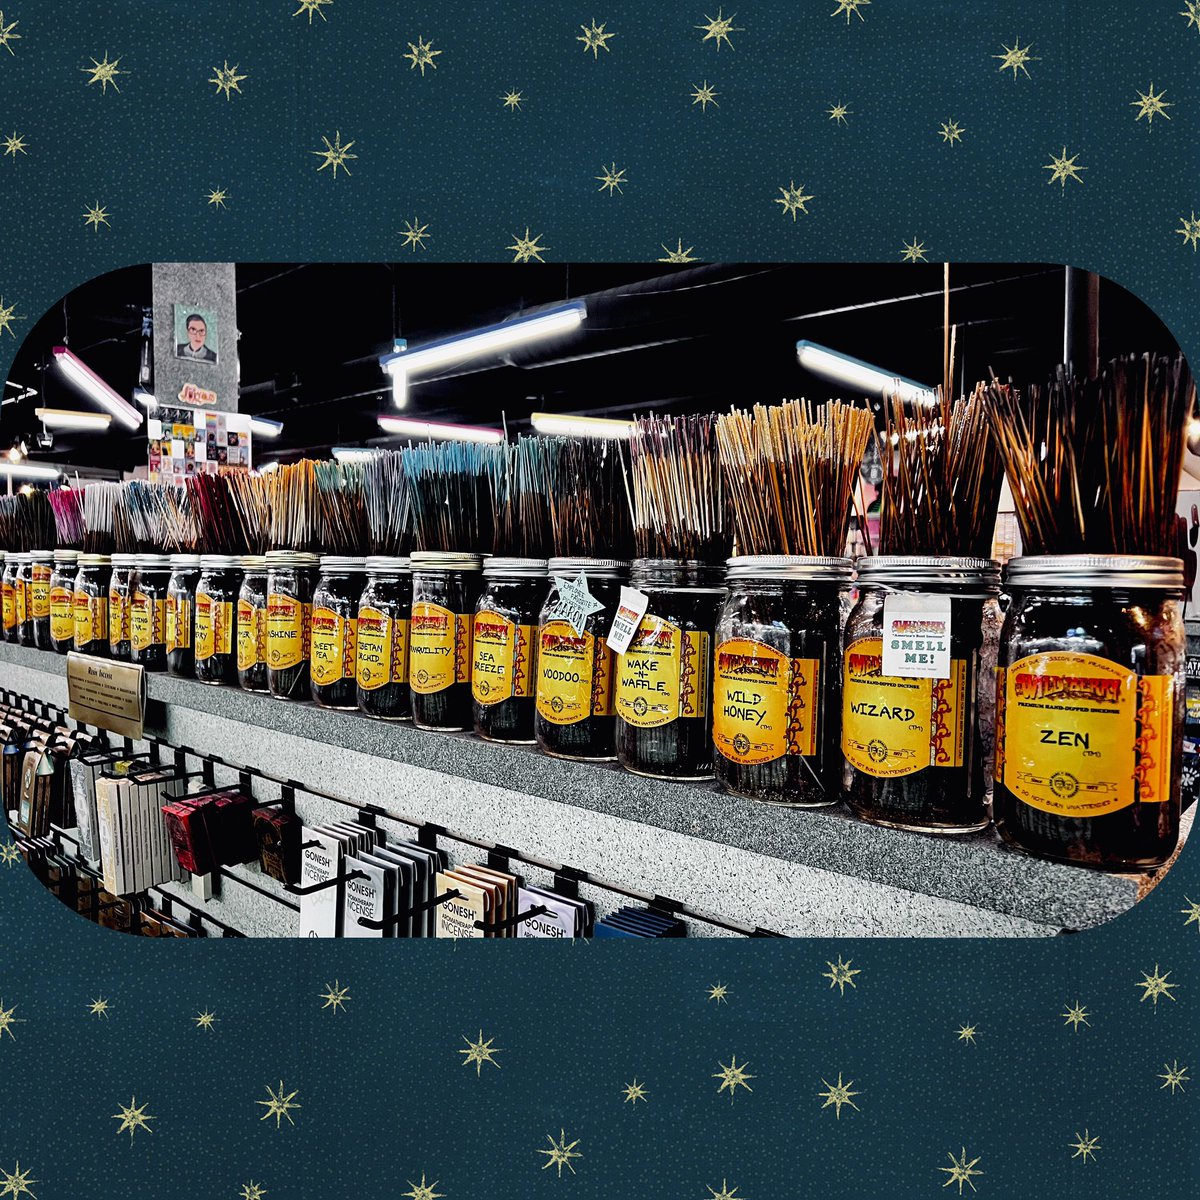 Come smell our wide array of Wildberry #incense! 🔥 This isn’t even all of our scents in stock now

Shop Down in the Valley in Golden Valley & Maple Grove today! 

#incenseburner #incenseholder #incensestick #incensesticks #scent #scents #recordstore